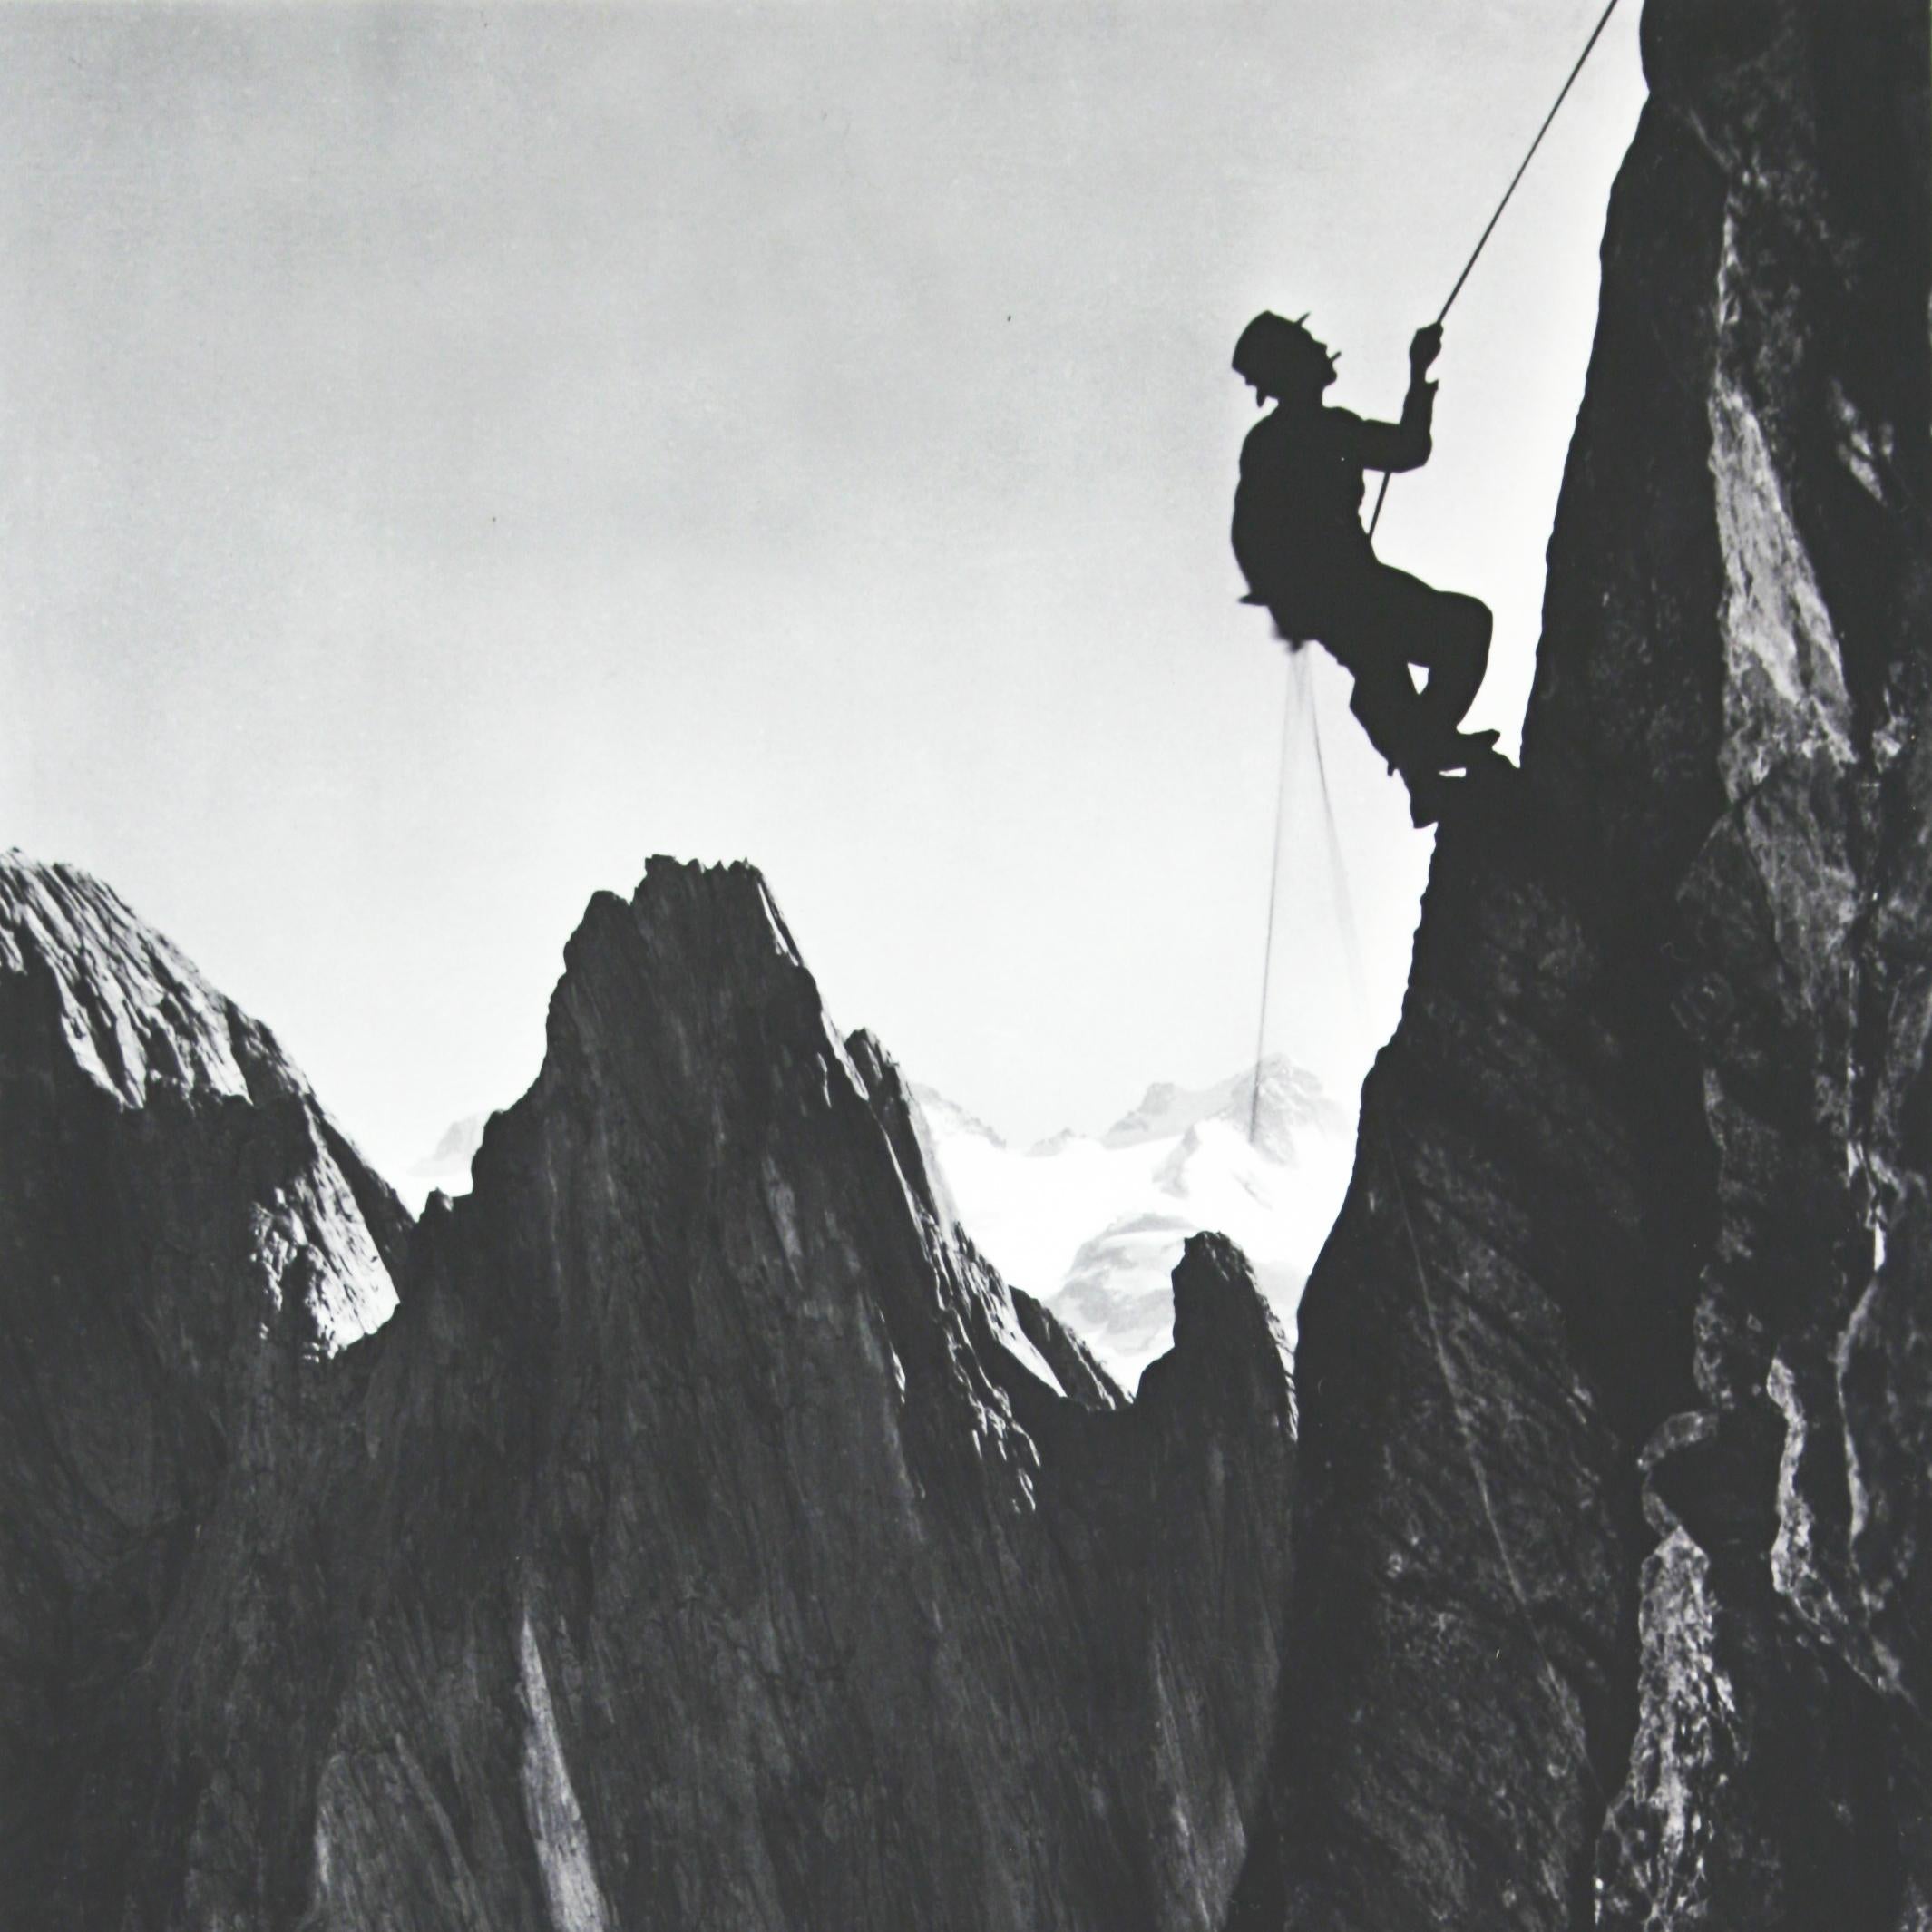 English Alpine Mountaineering Photograph, 'CLIMBER' Taken from 1930s Original For Sale